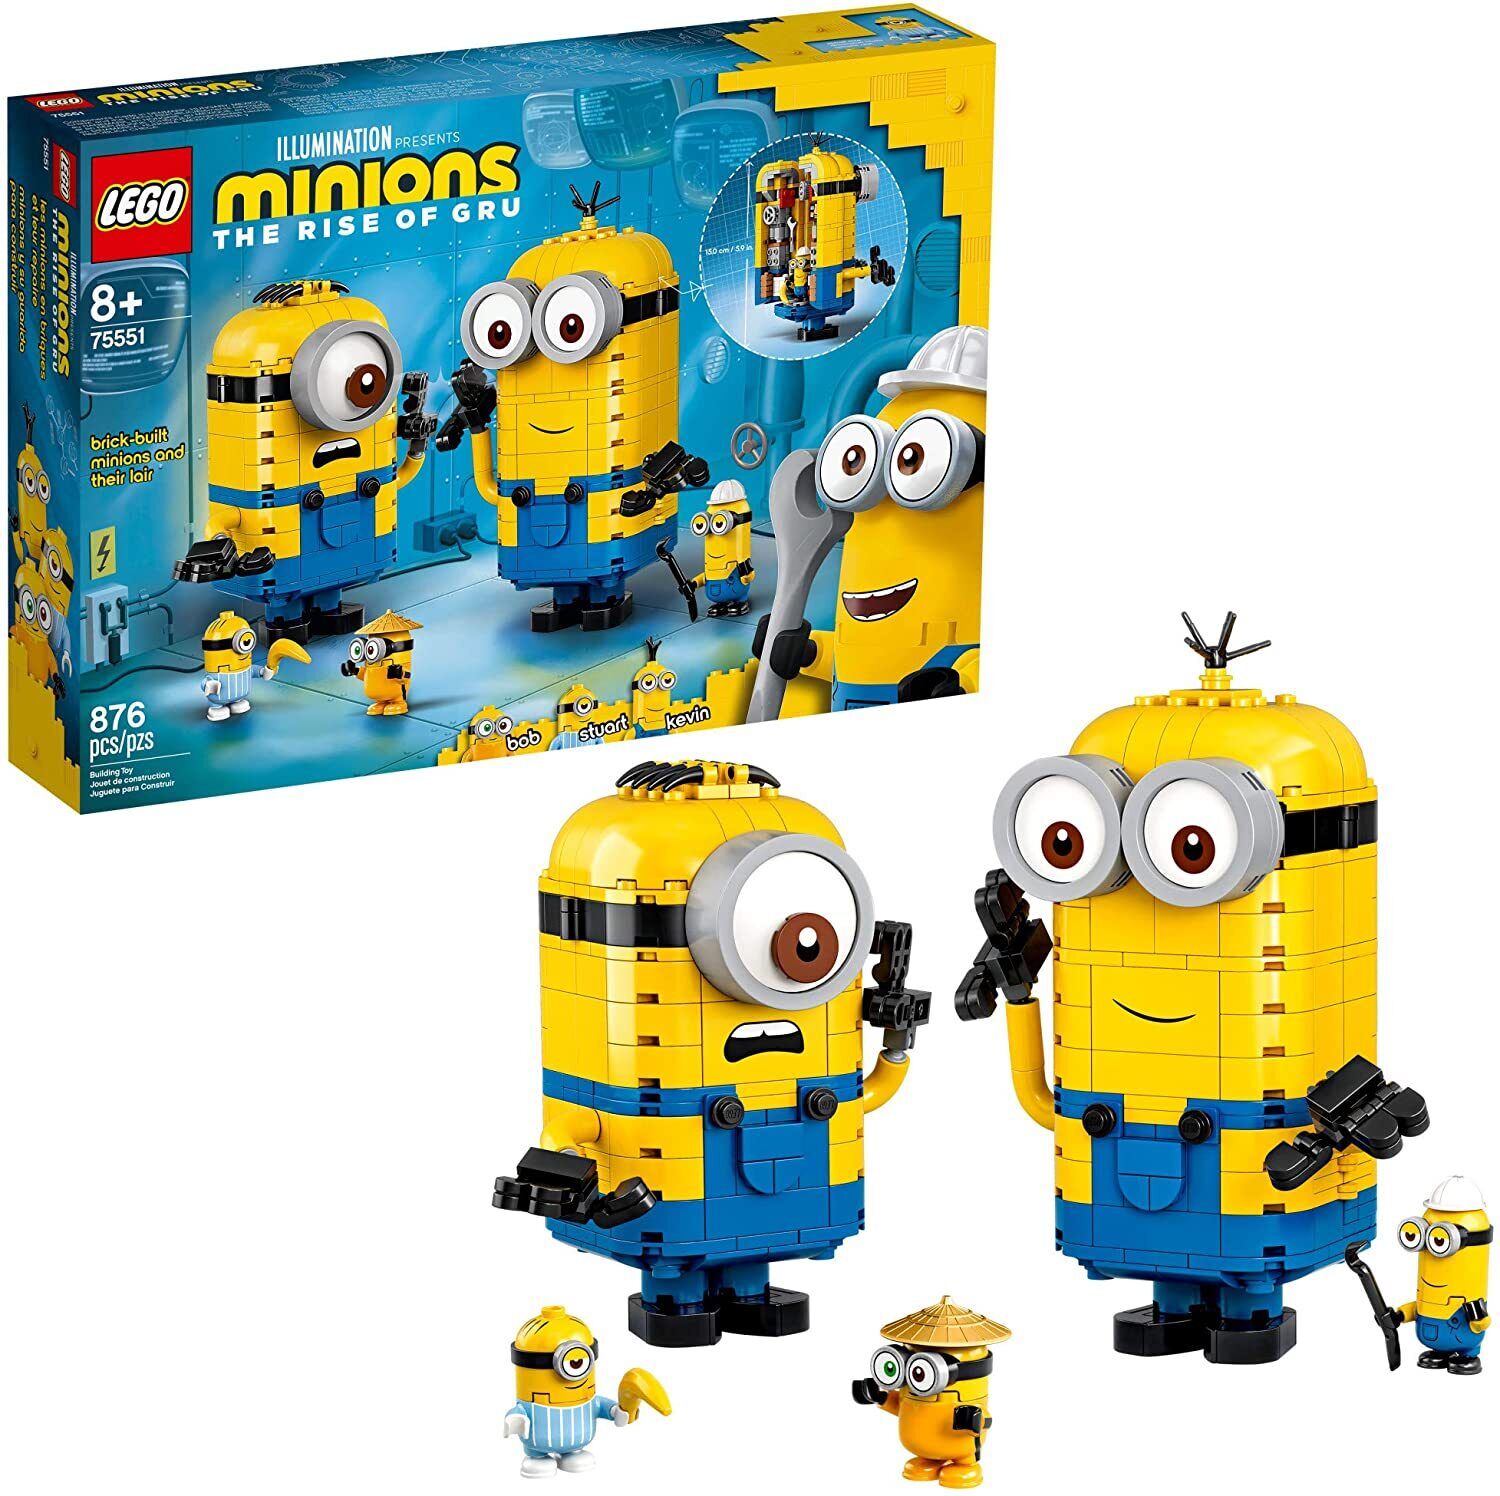 LEGO Brick-built Minions and their Lair Minions 75551 Rise of Gru Building Toys